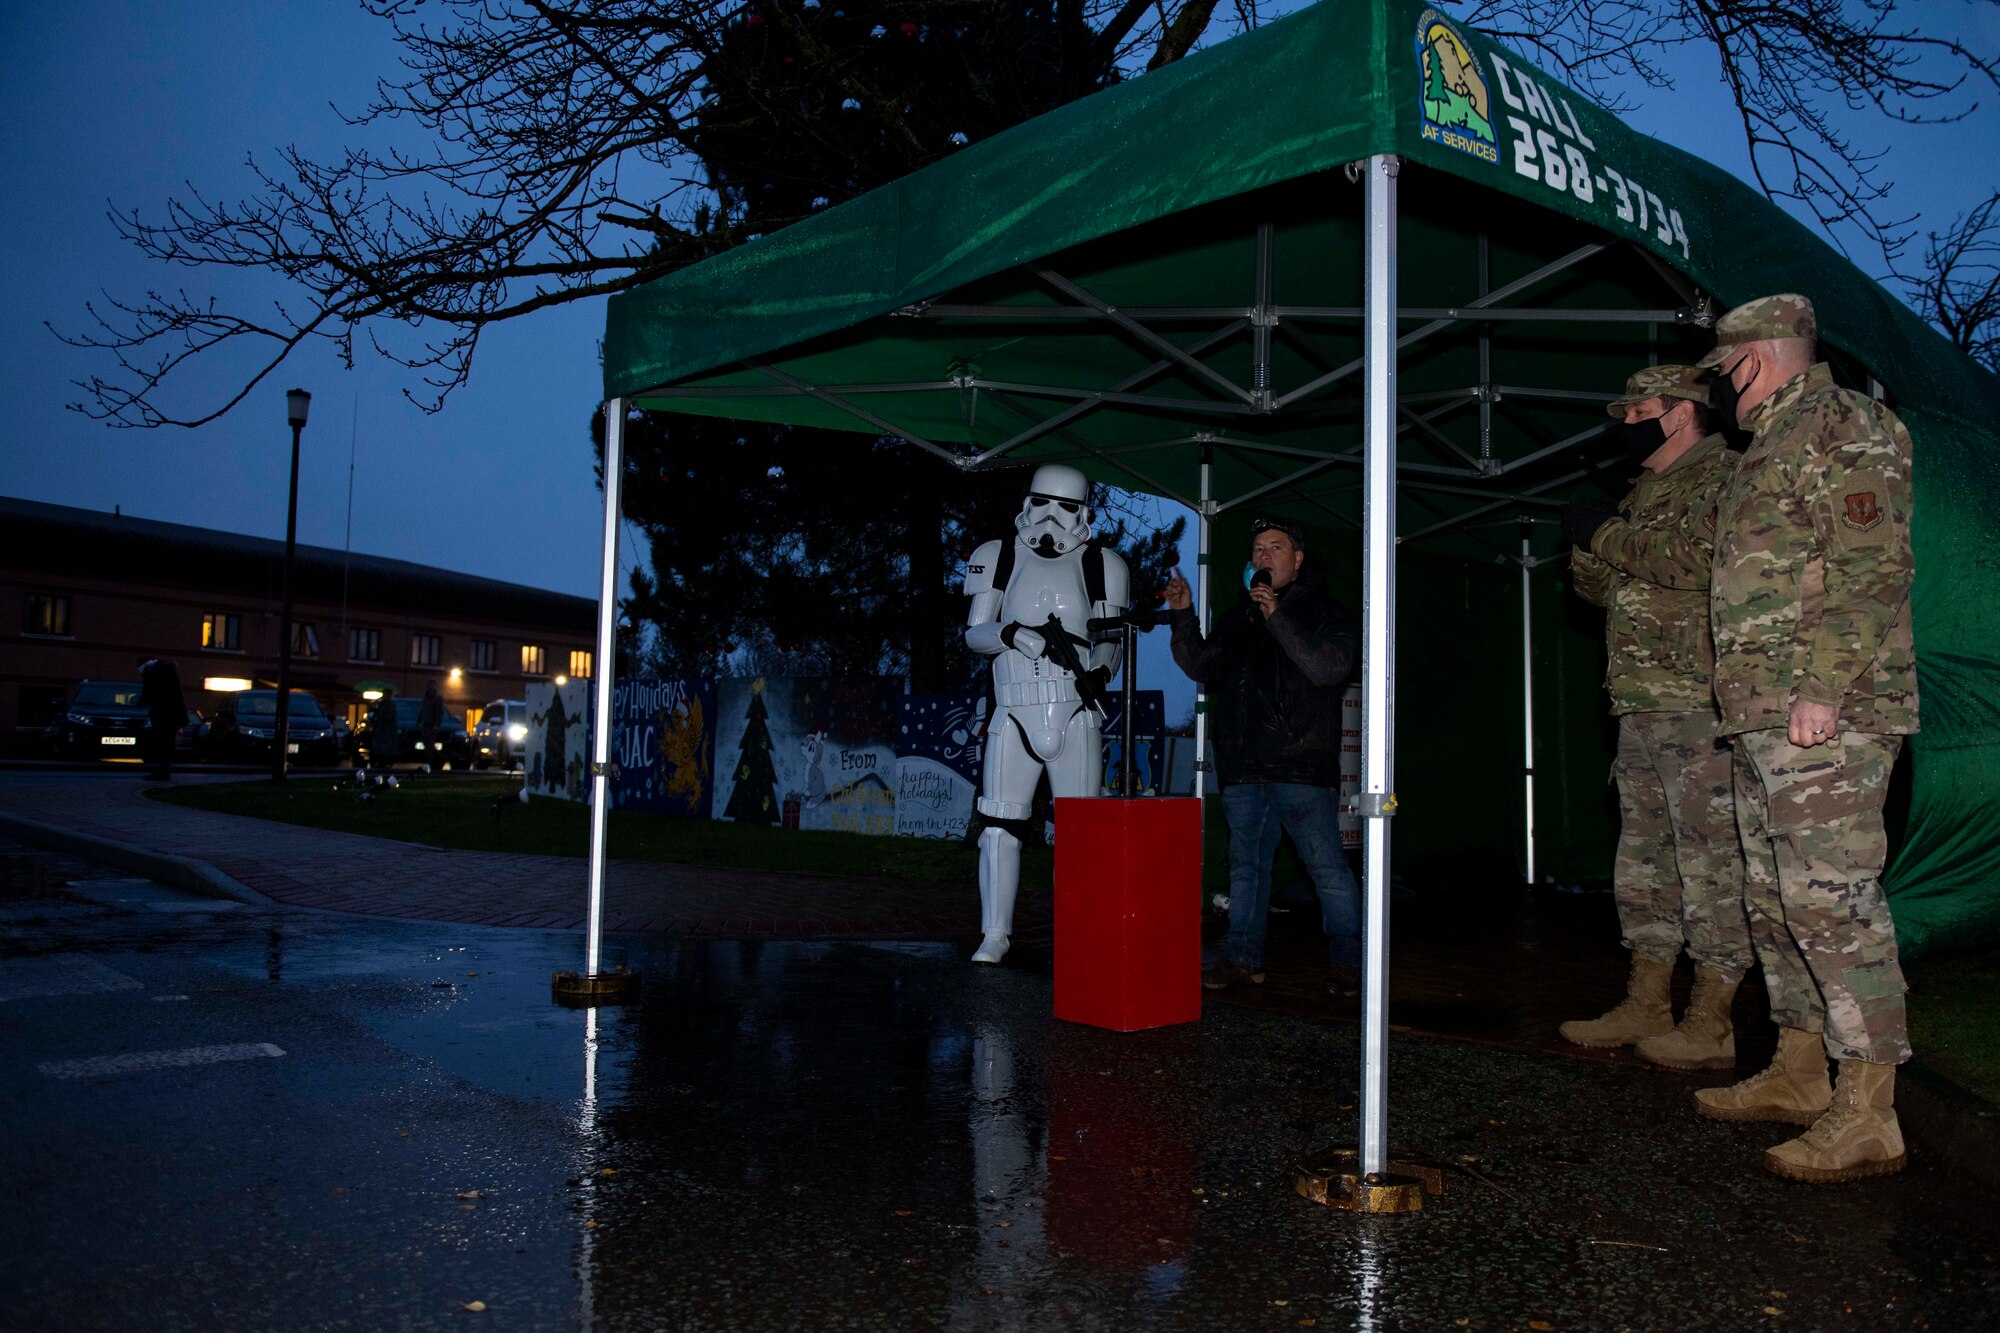 Members of the 501st Combat Support Wing community gather for a tree lighting ceremony at RAF Alconbury, England, Dec. 4, 2020. Col. Kurt Wendt, 501 CSW commander, and Chief Master Sgt. Daniel Keene, 501 CSW command chief, lit the tree with Santa Clause. (U.S. Air Force photo by Senior Airman Jennifer Zima)